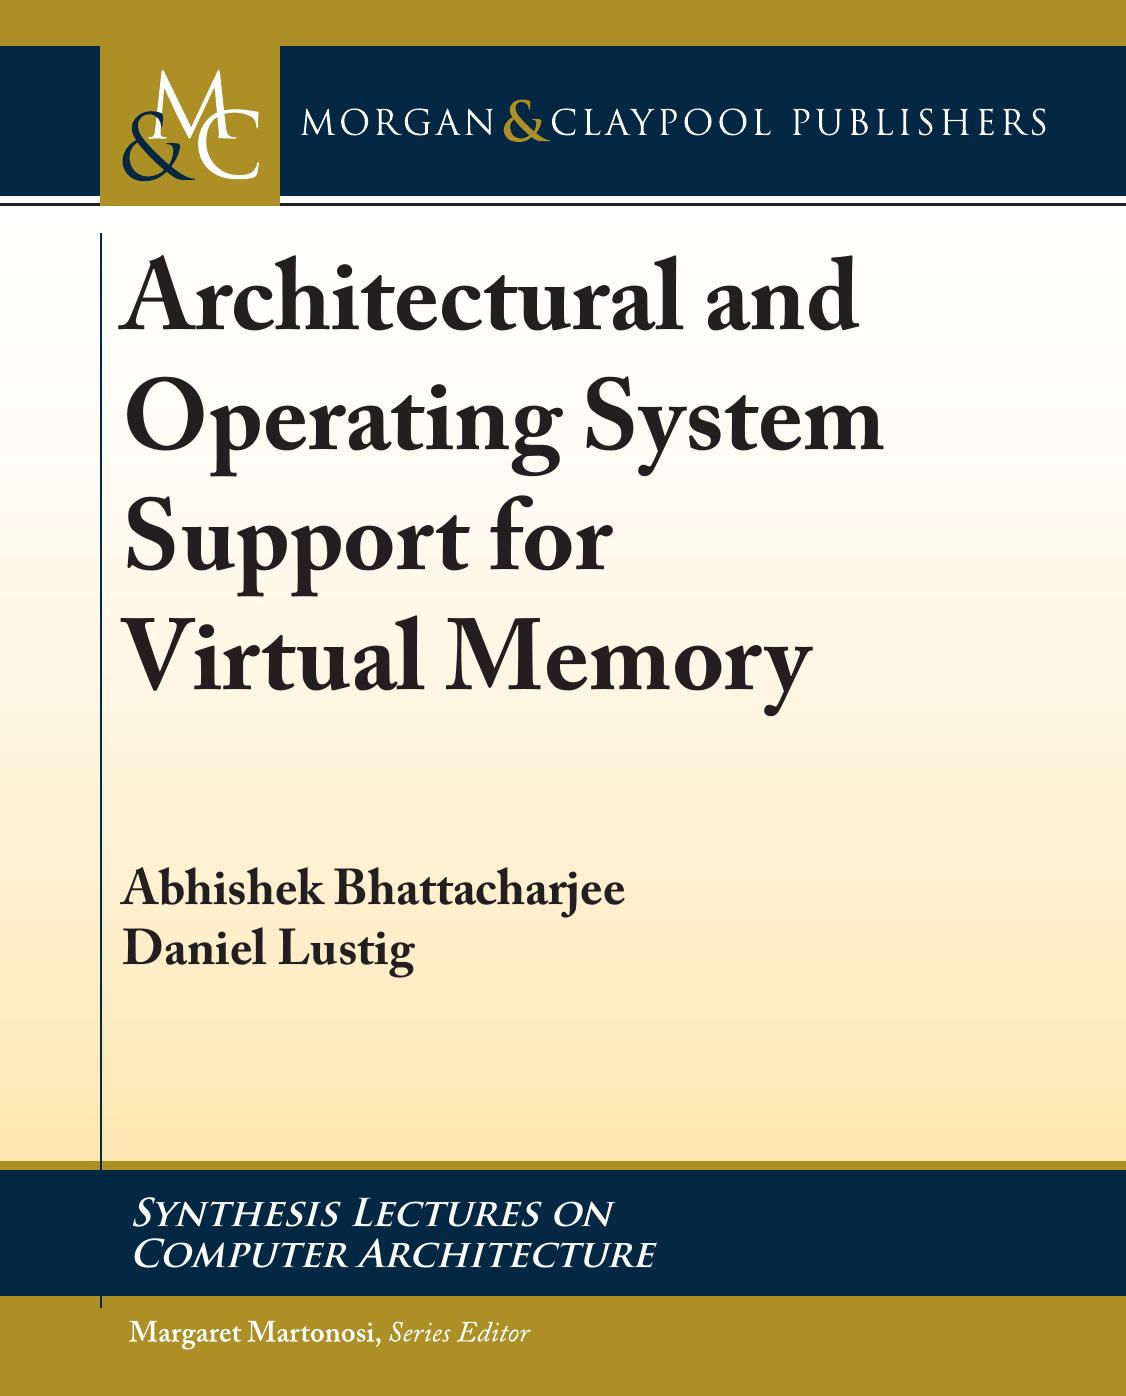 Architecture and operating system support for virtual memory by Abhishek Bhattacharjee Daniel Lustig